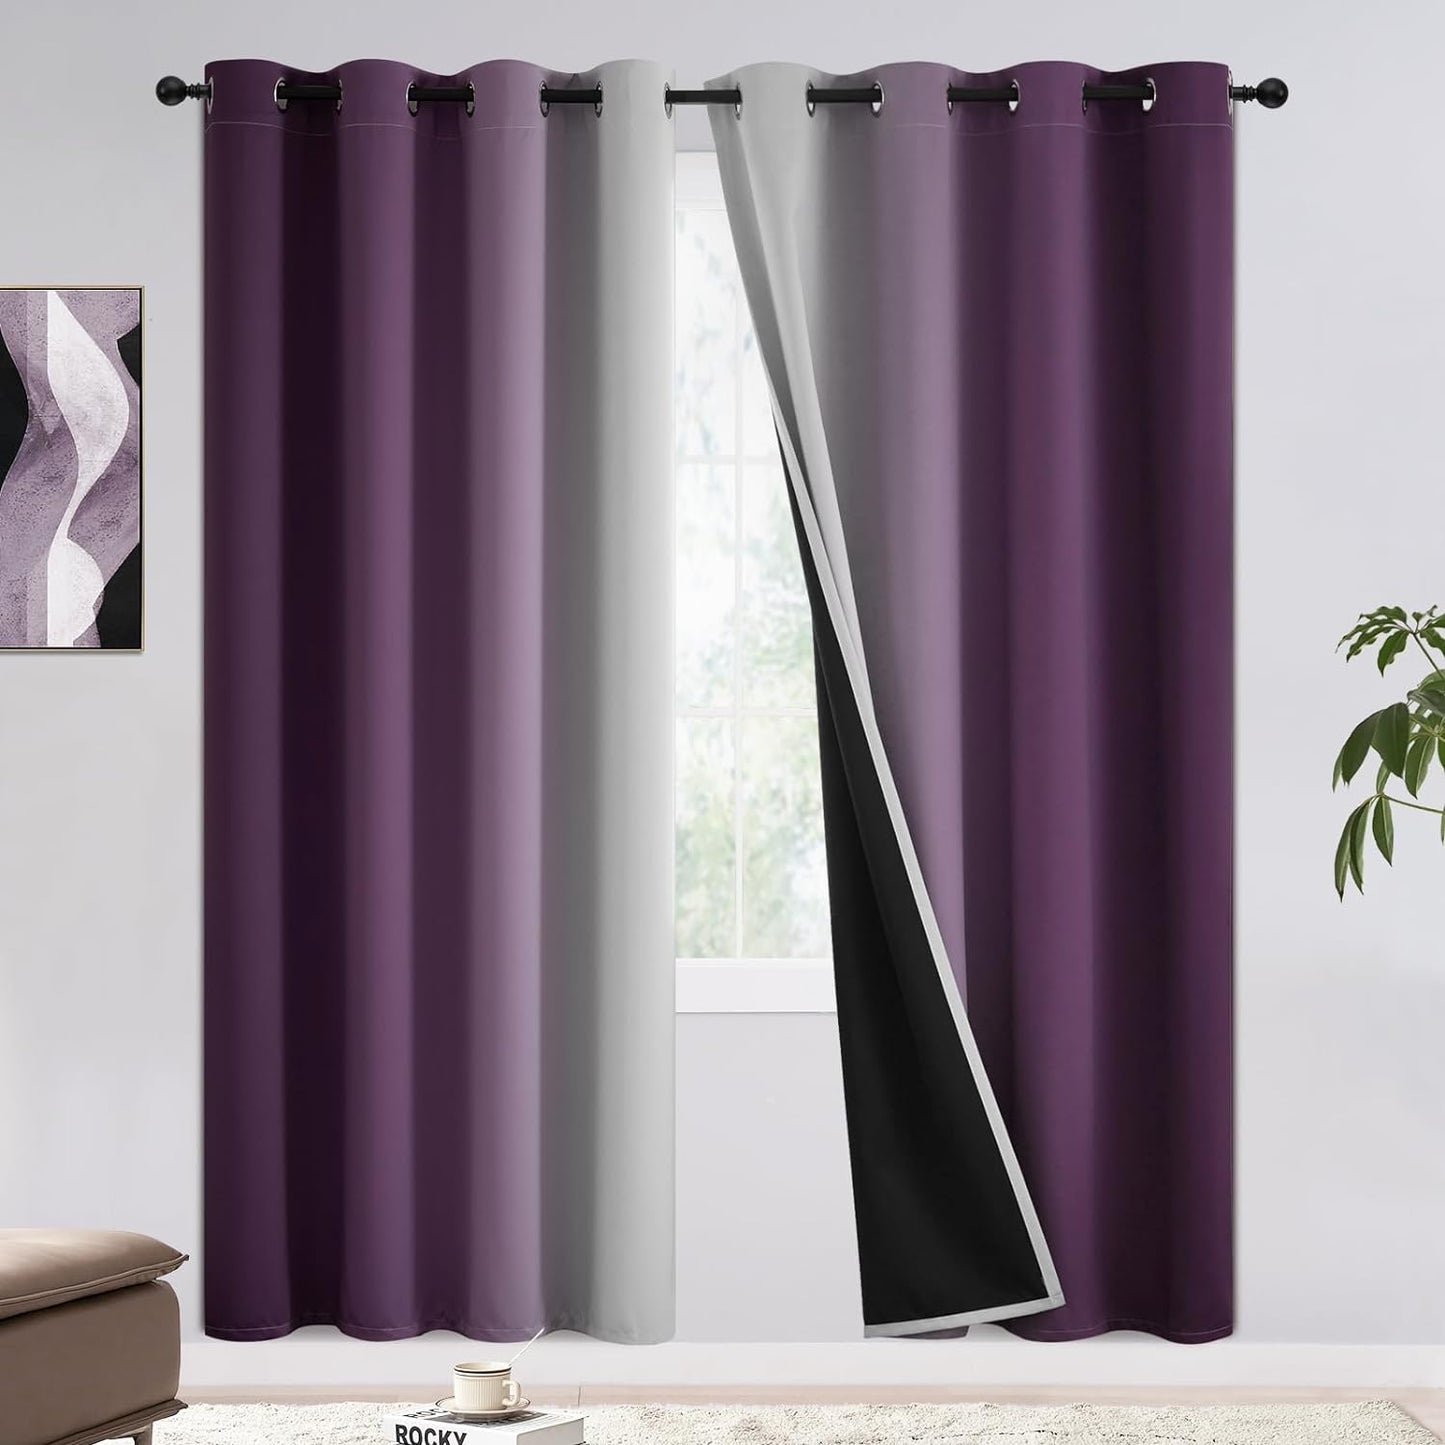 COSVIYA 100% Blackout Curtains & Drapes Ombre Purple Curtains 63 Inch Length 2 Panels,Full Room Darkening Grommet Gradient Insulated Thermal Window Curtains for Bedroom/Living Room,52X63 Inches  COSVIYA Blackout Purple To Grayish White 52W X 72L 